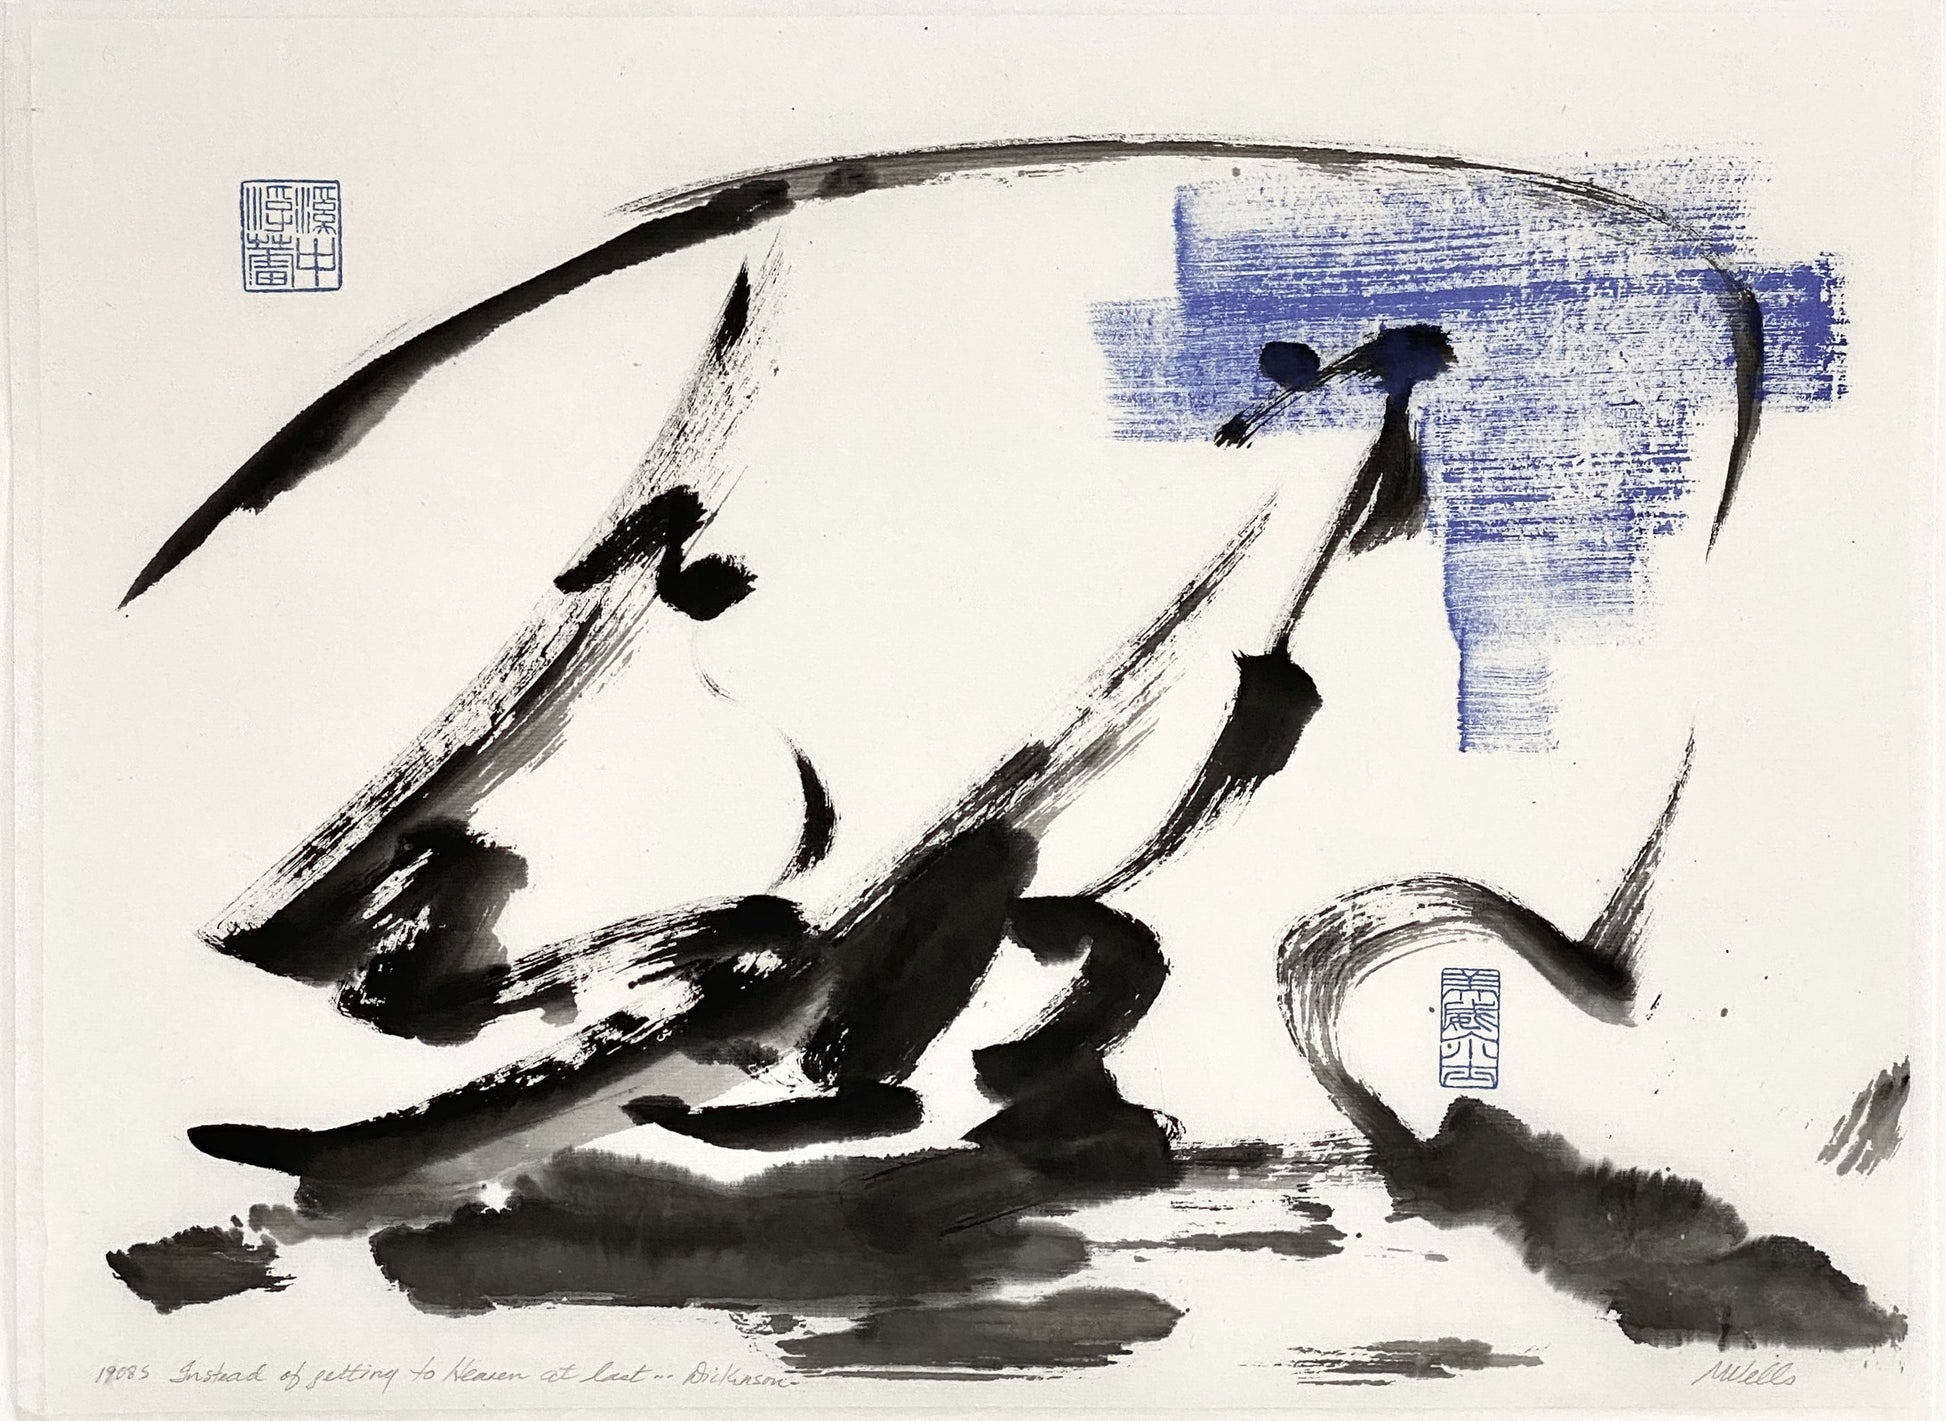 Abstract sumi e print by Marilyn Wells based on poem by Emily Dickinson. Ink on Paper